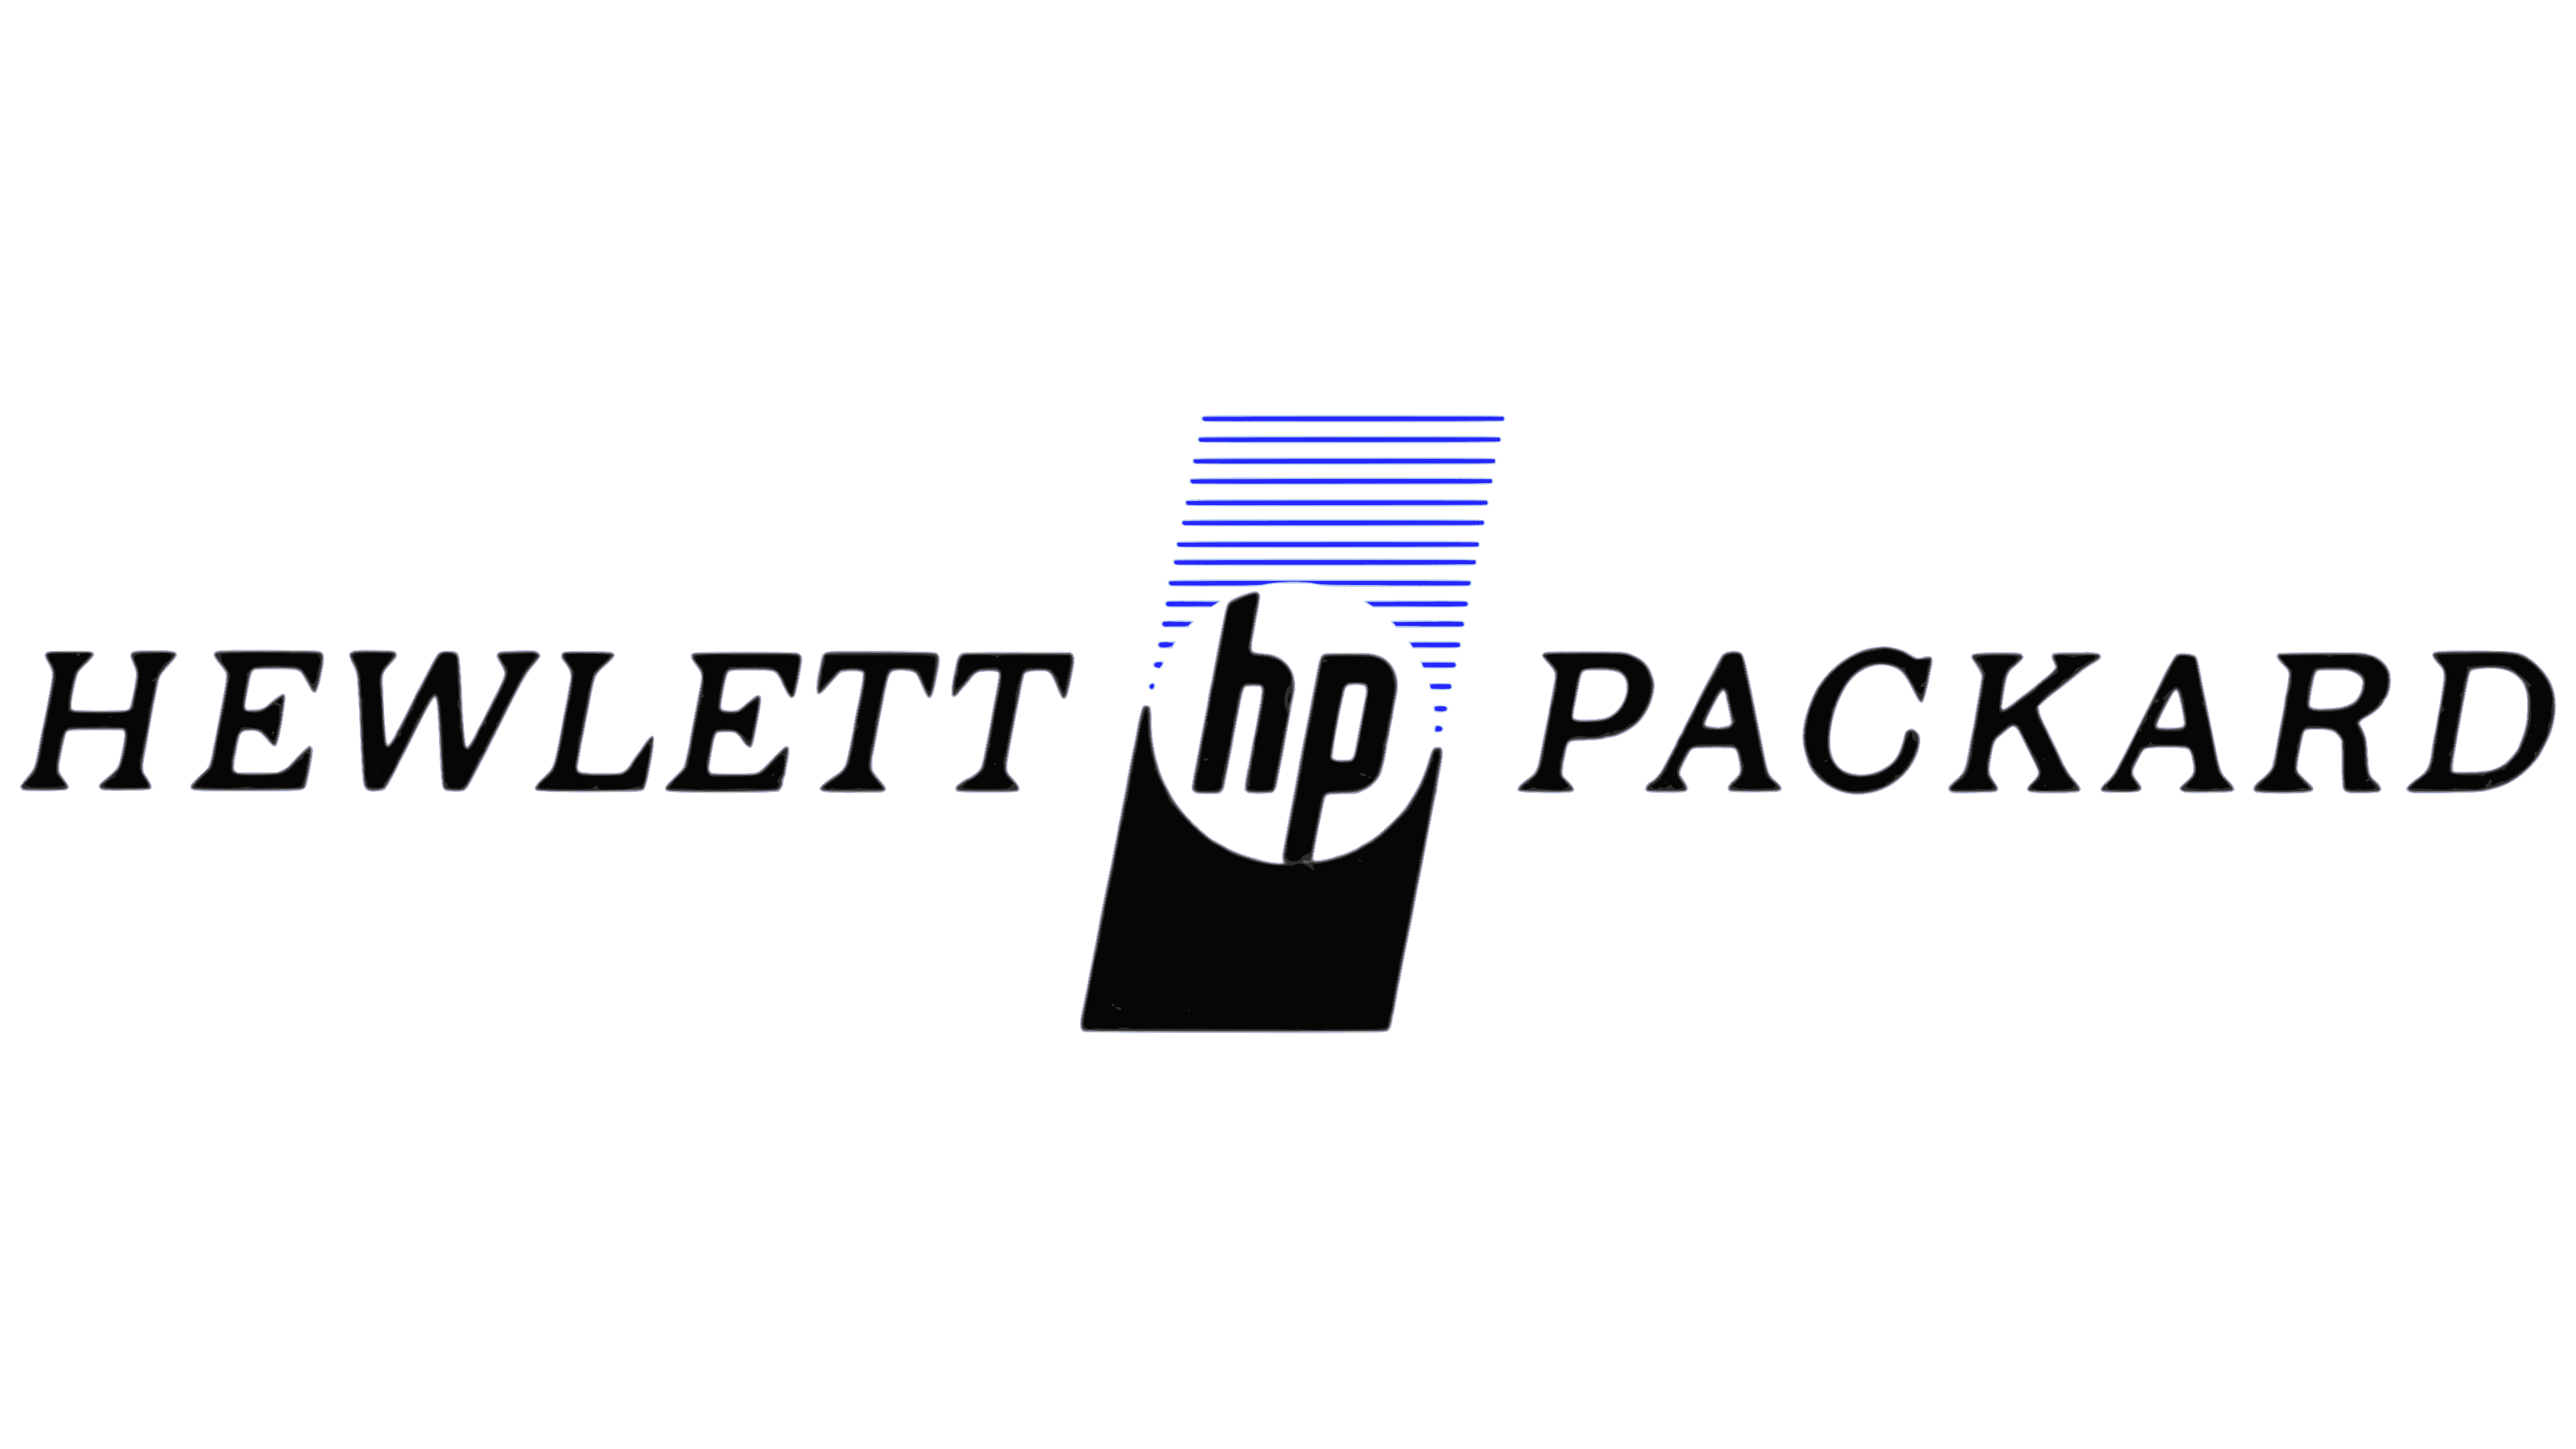 HP Logo, PNG, Symbol, History, Meaning